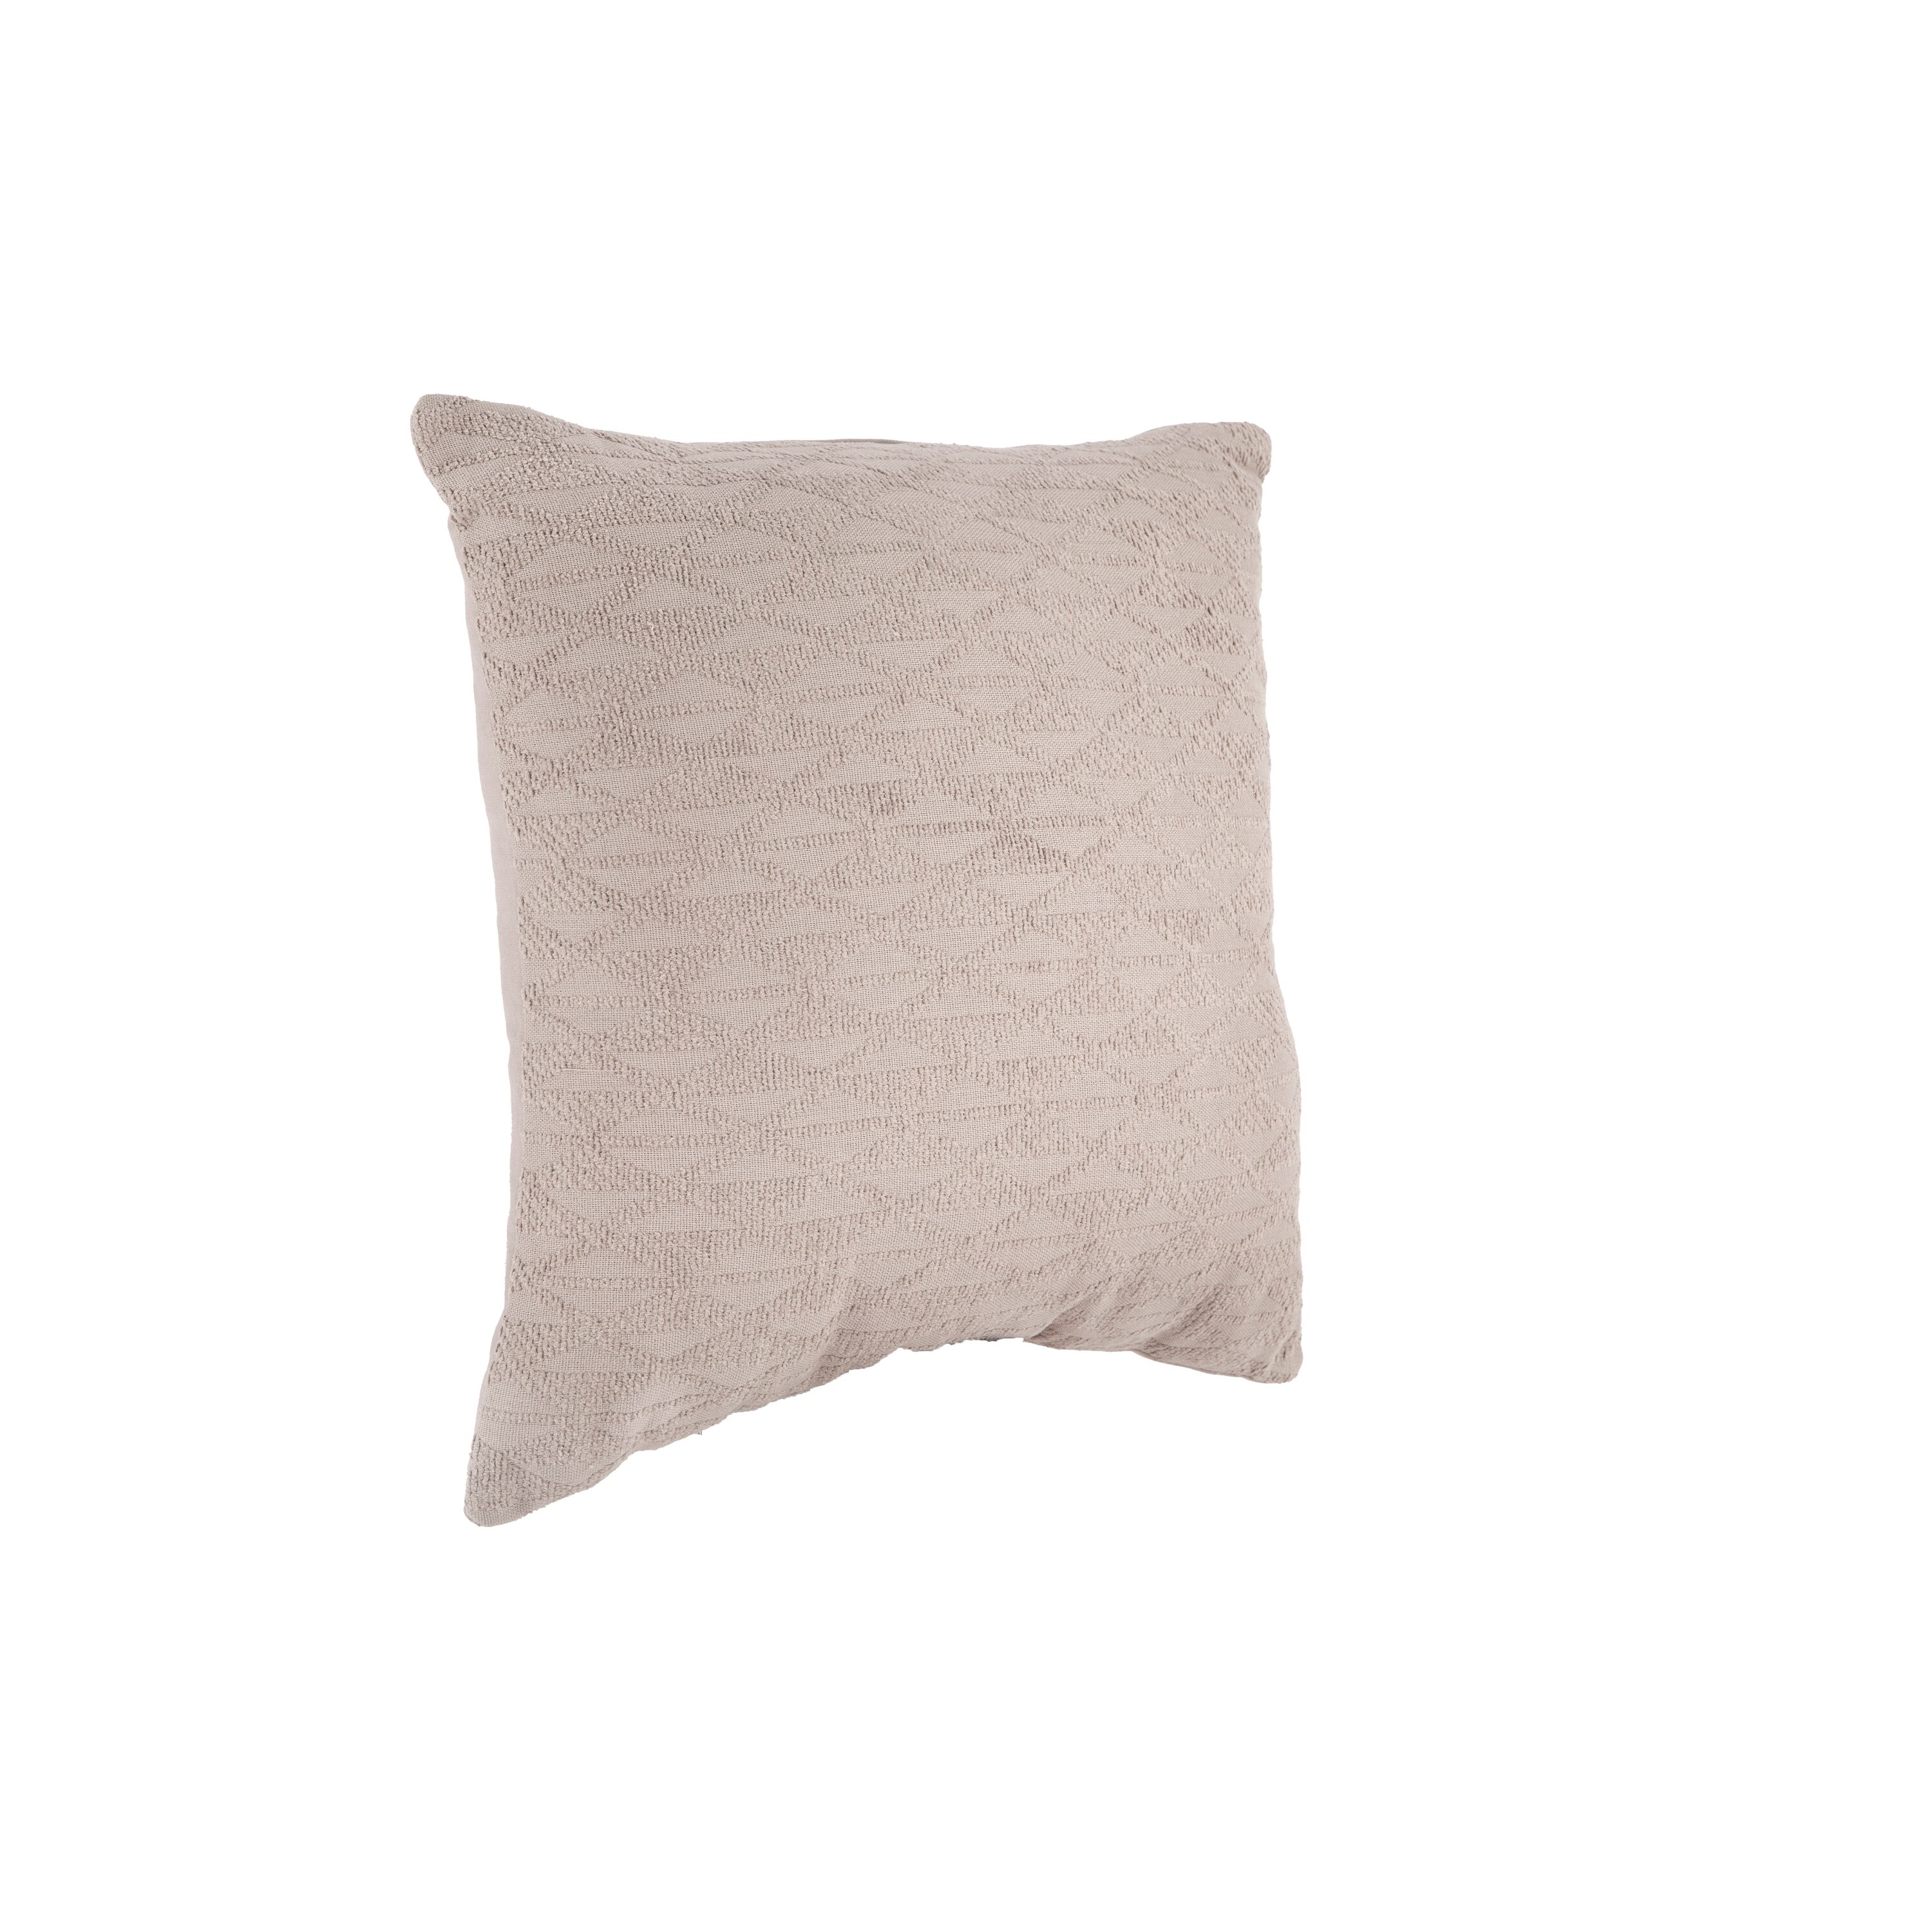 https://ak1.ostkcdn.com/images/products/is/images/direct/7f904b78a104f134097369e7b6dfdac797db7080/Square-100-percent-Cotton-Pillow-Cover-%26-Insert-%282-pck%29-18x18--multi.jpg